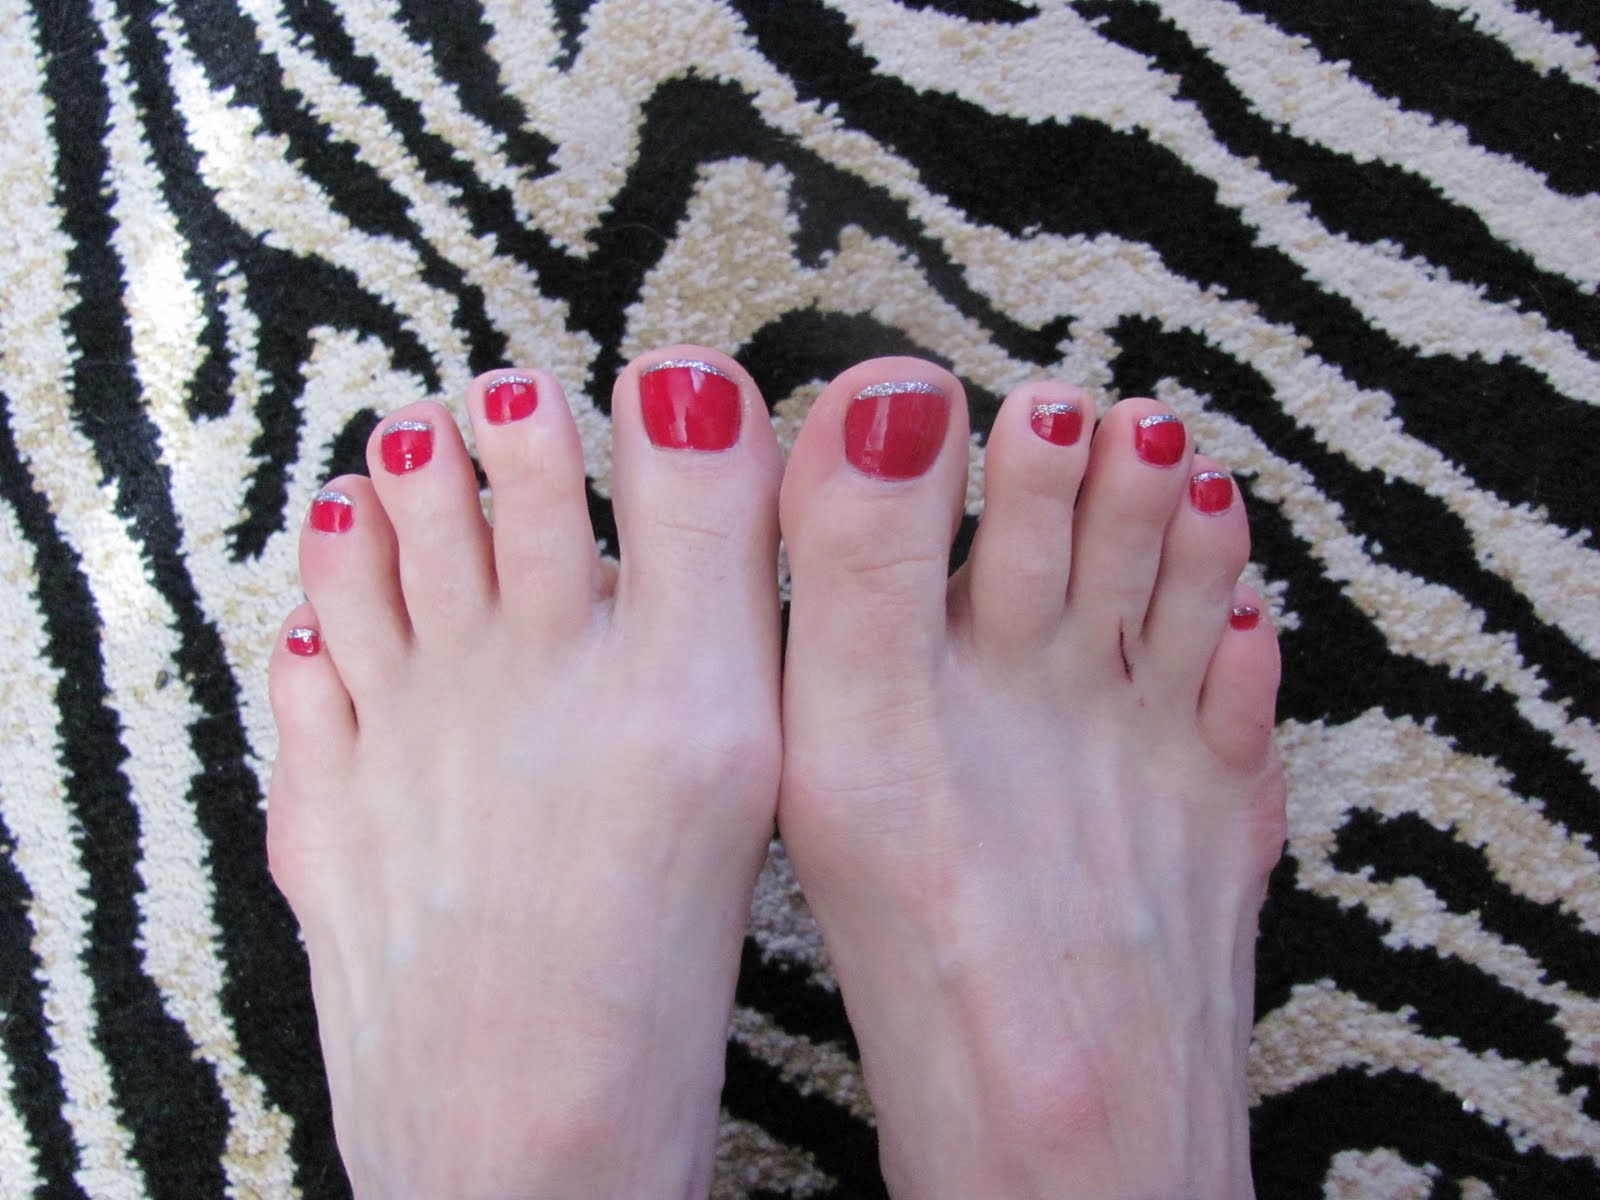 sexy punk rock girls feet and toes free photo